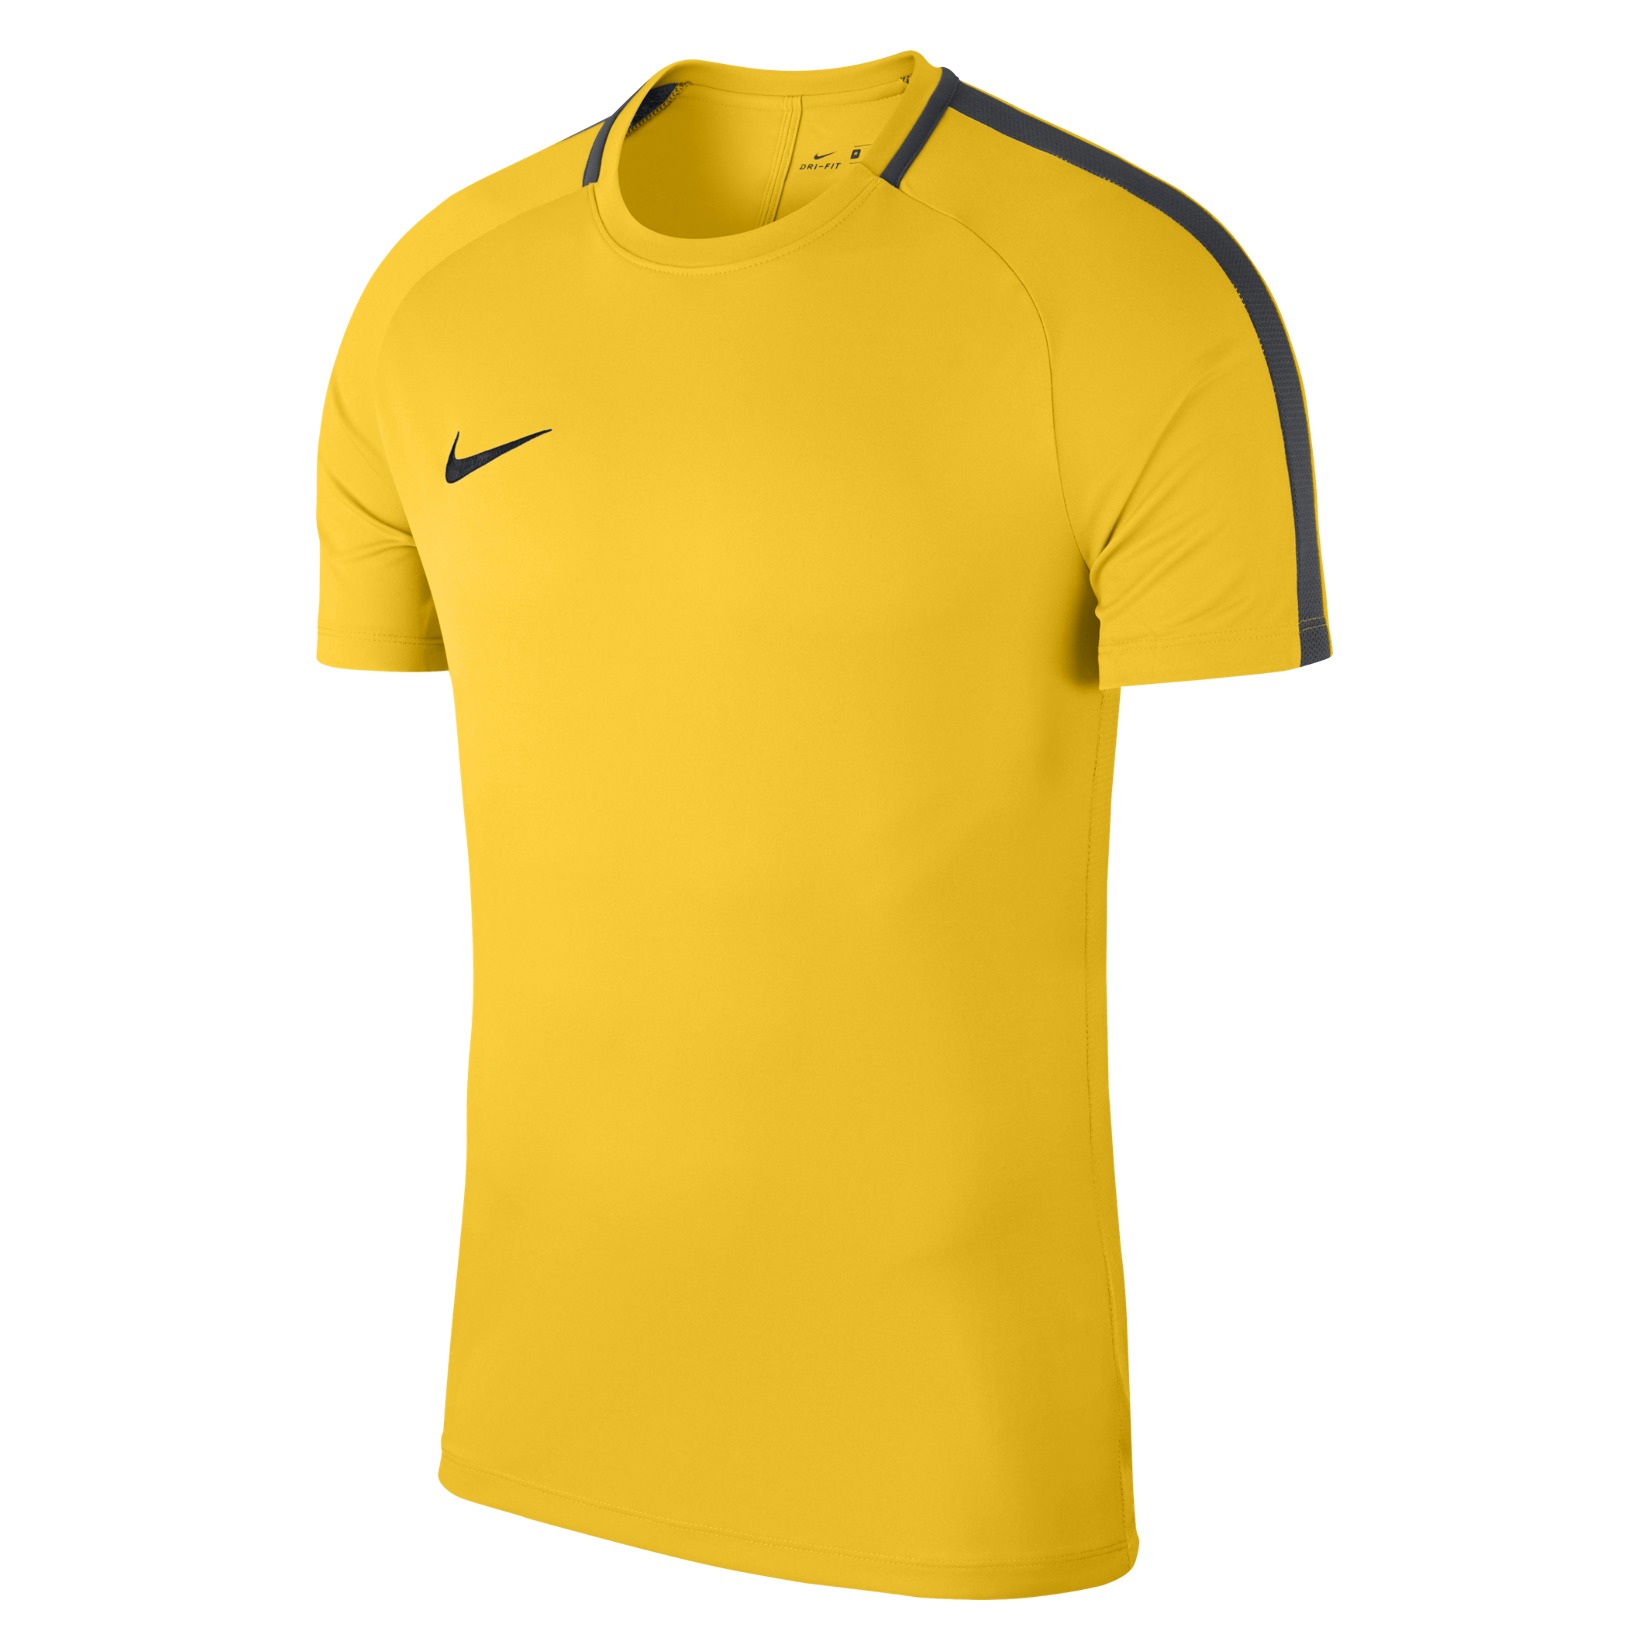 Nike Academy 18 Short Sleeve Top (M) Tour Yellow-Anthracite-Black